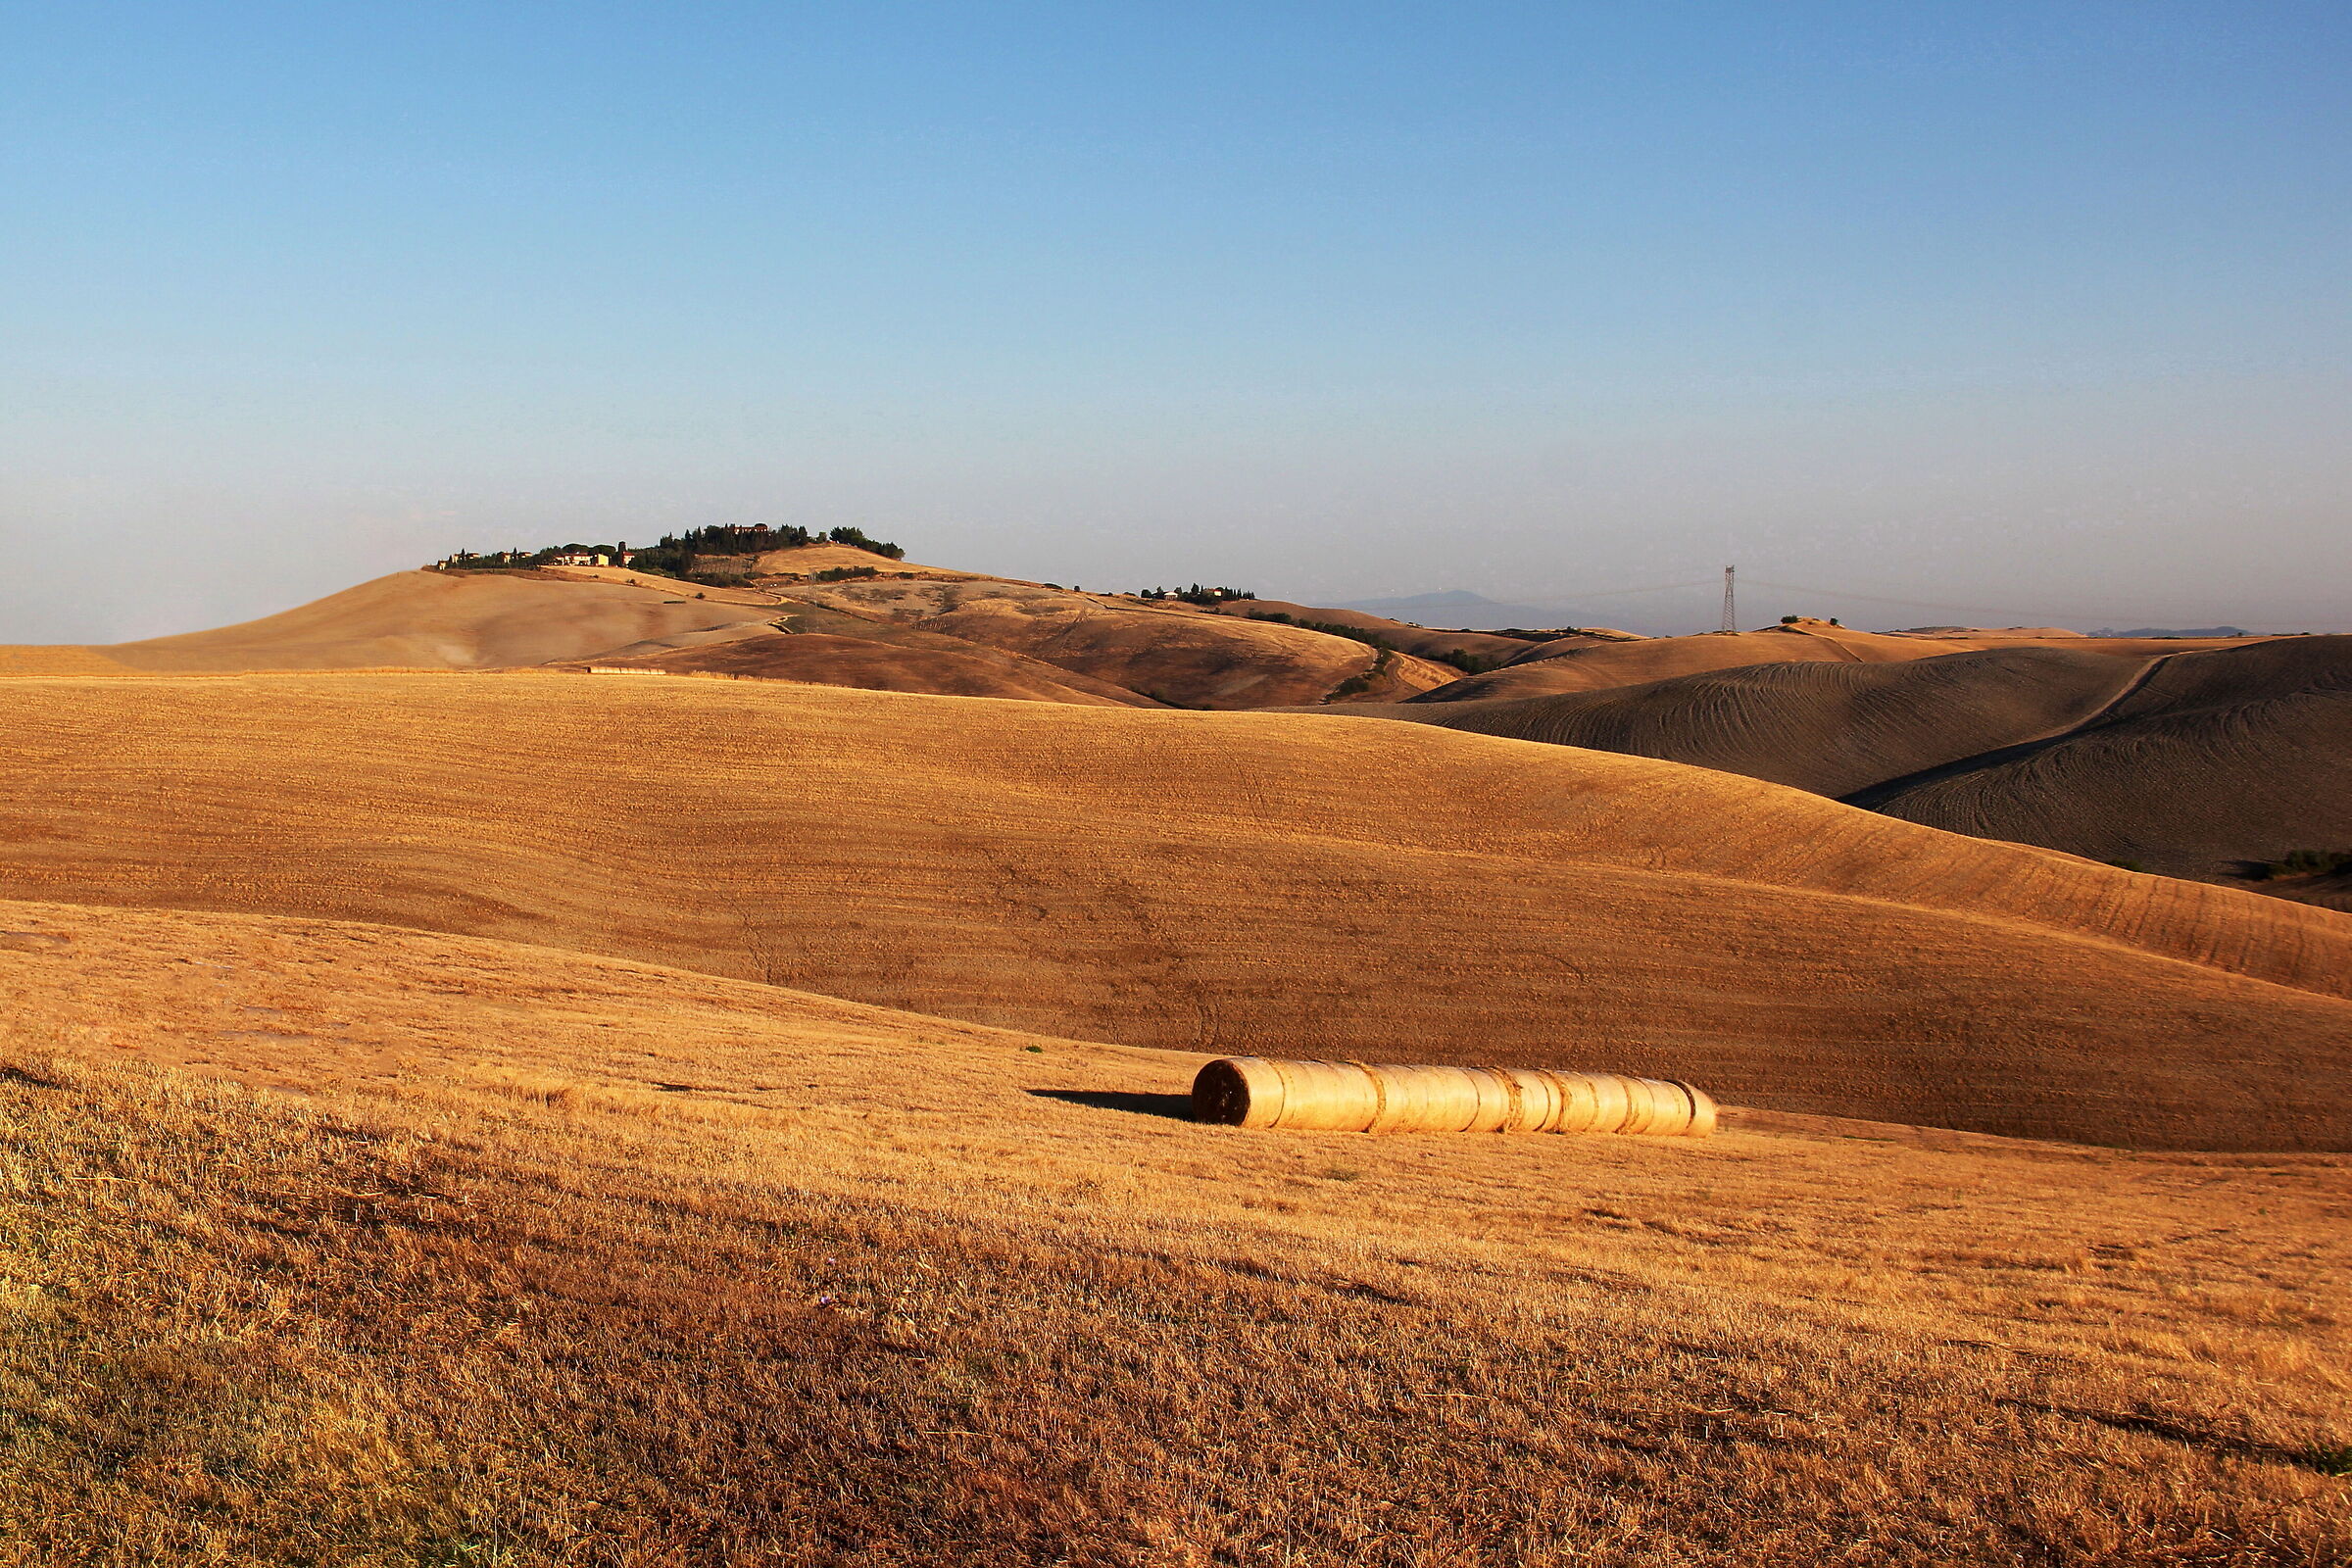 Glimpse of the Sienese countryside...